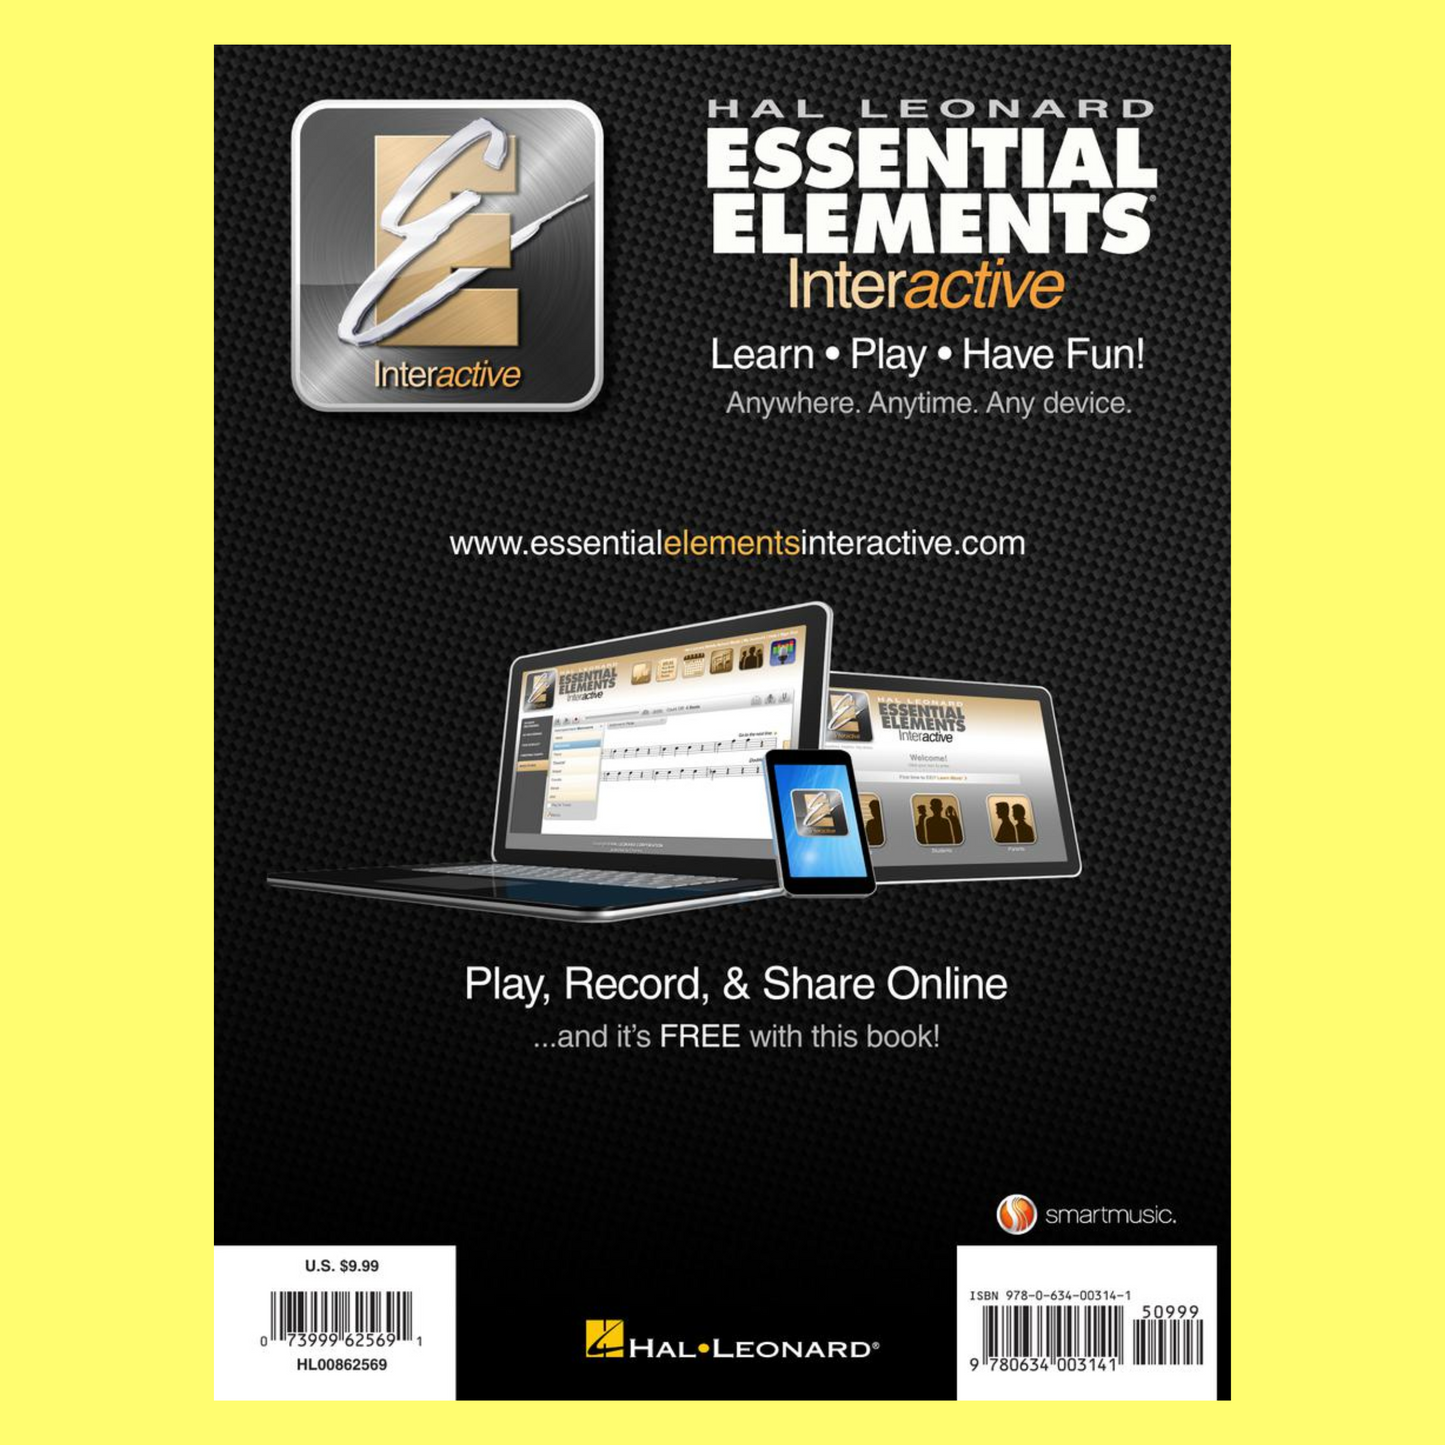 Essential Elements For Band - Clarinet Book 1 (Book & EEi)